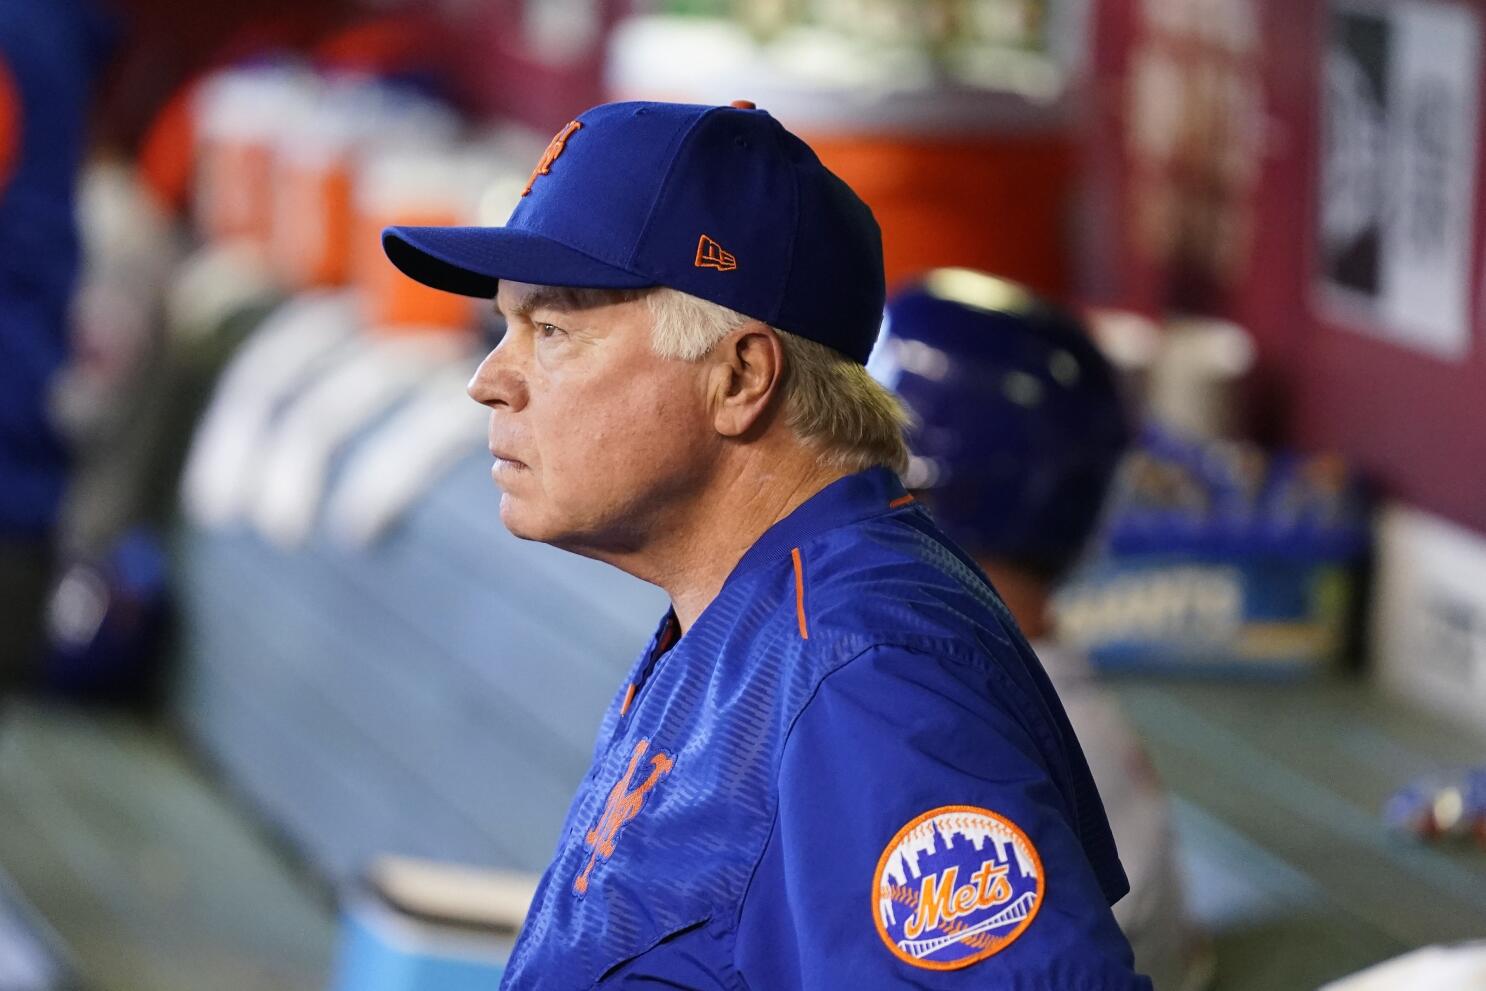 Mets manager Showalter suspended 1 game for reliever's pitch - The